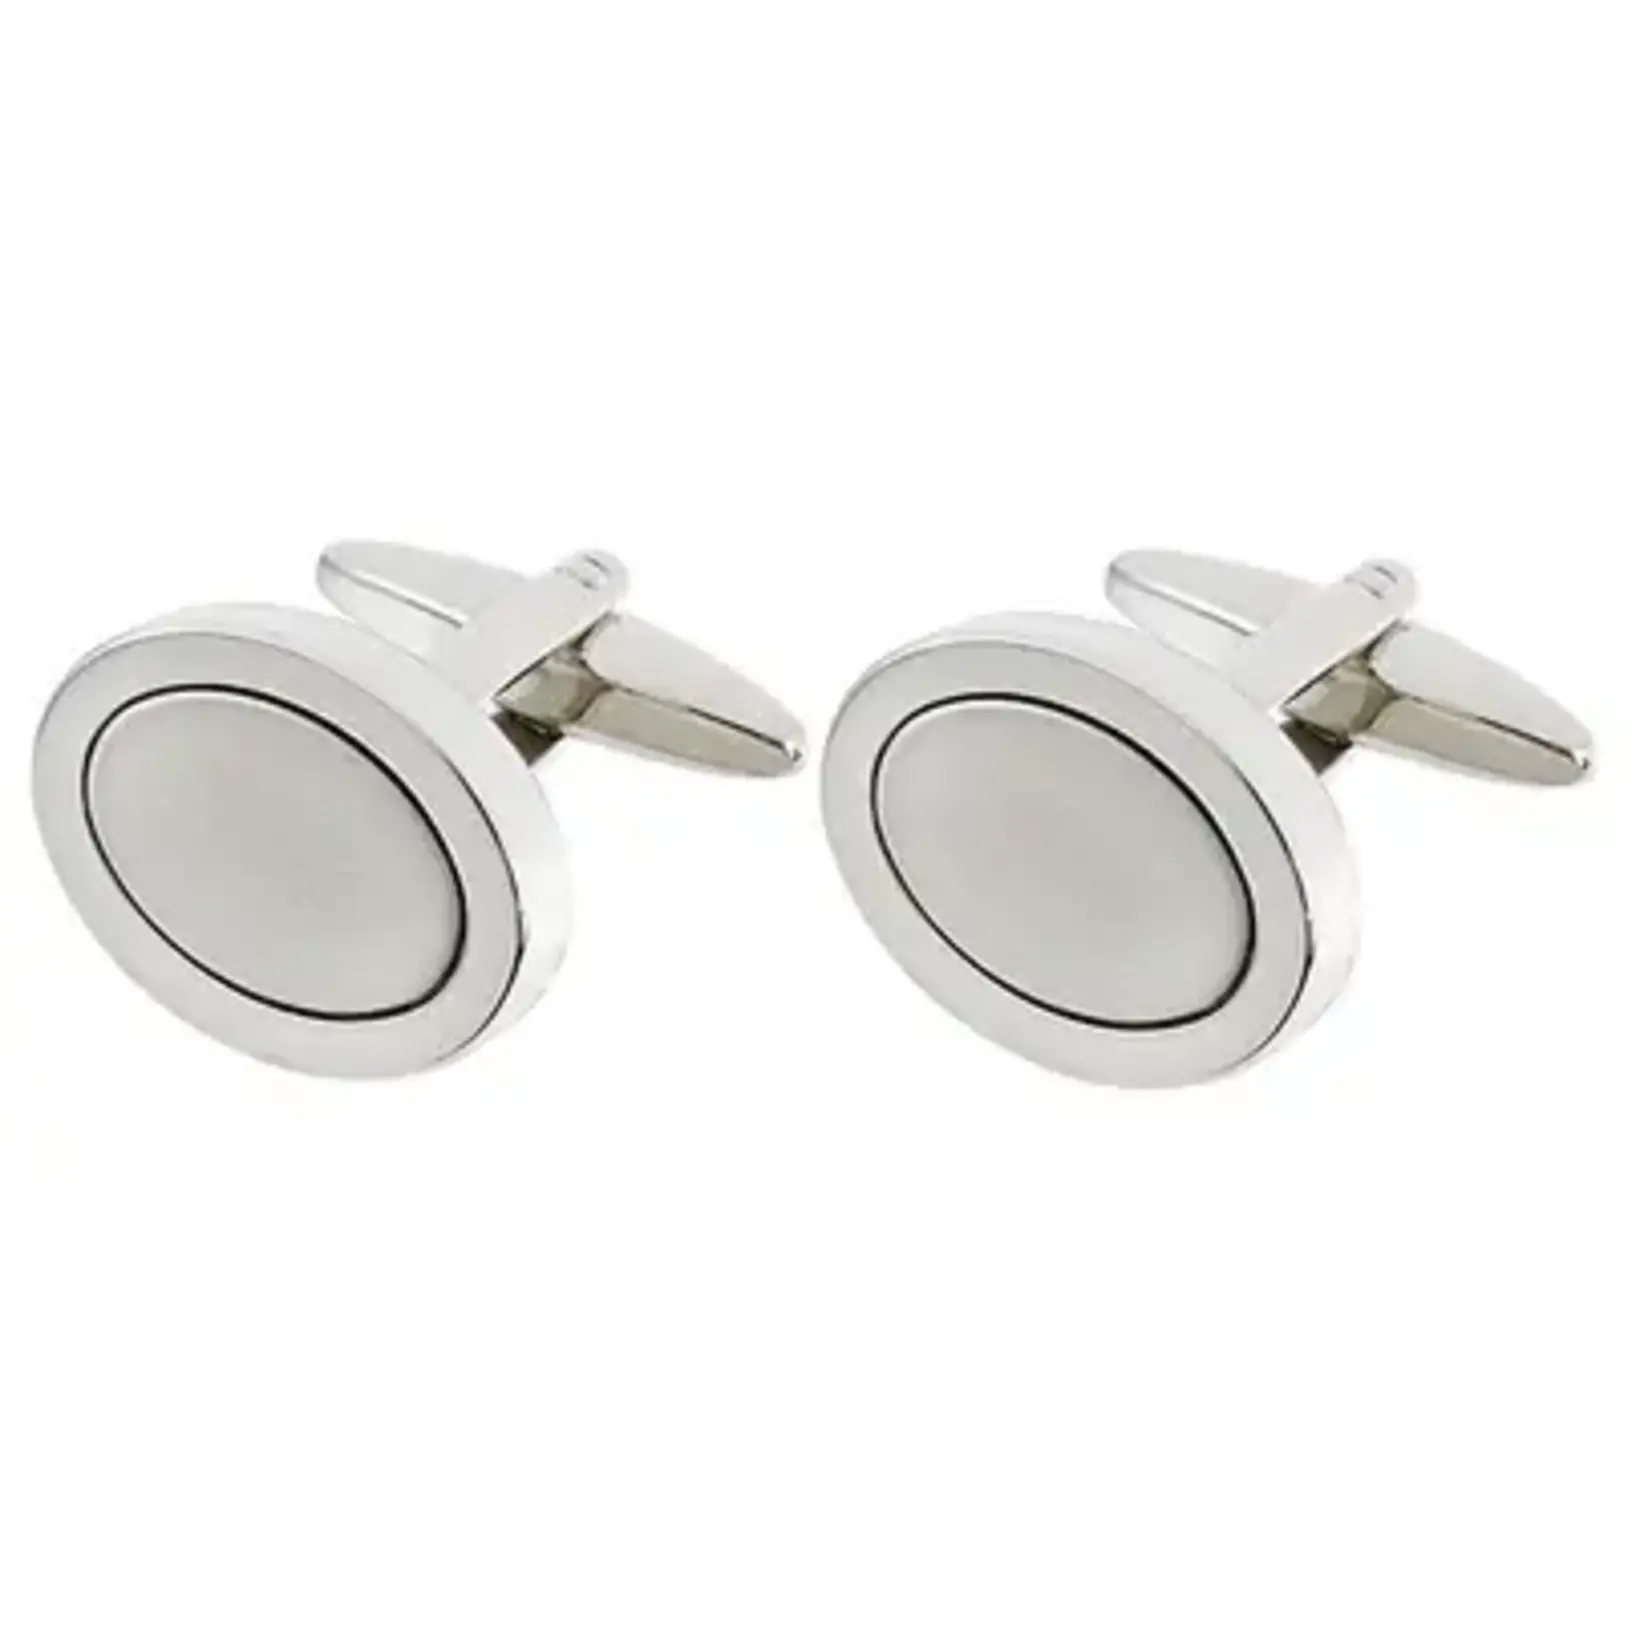 ALPINE Oval Cufflink with Brushed Center - ST-SC127